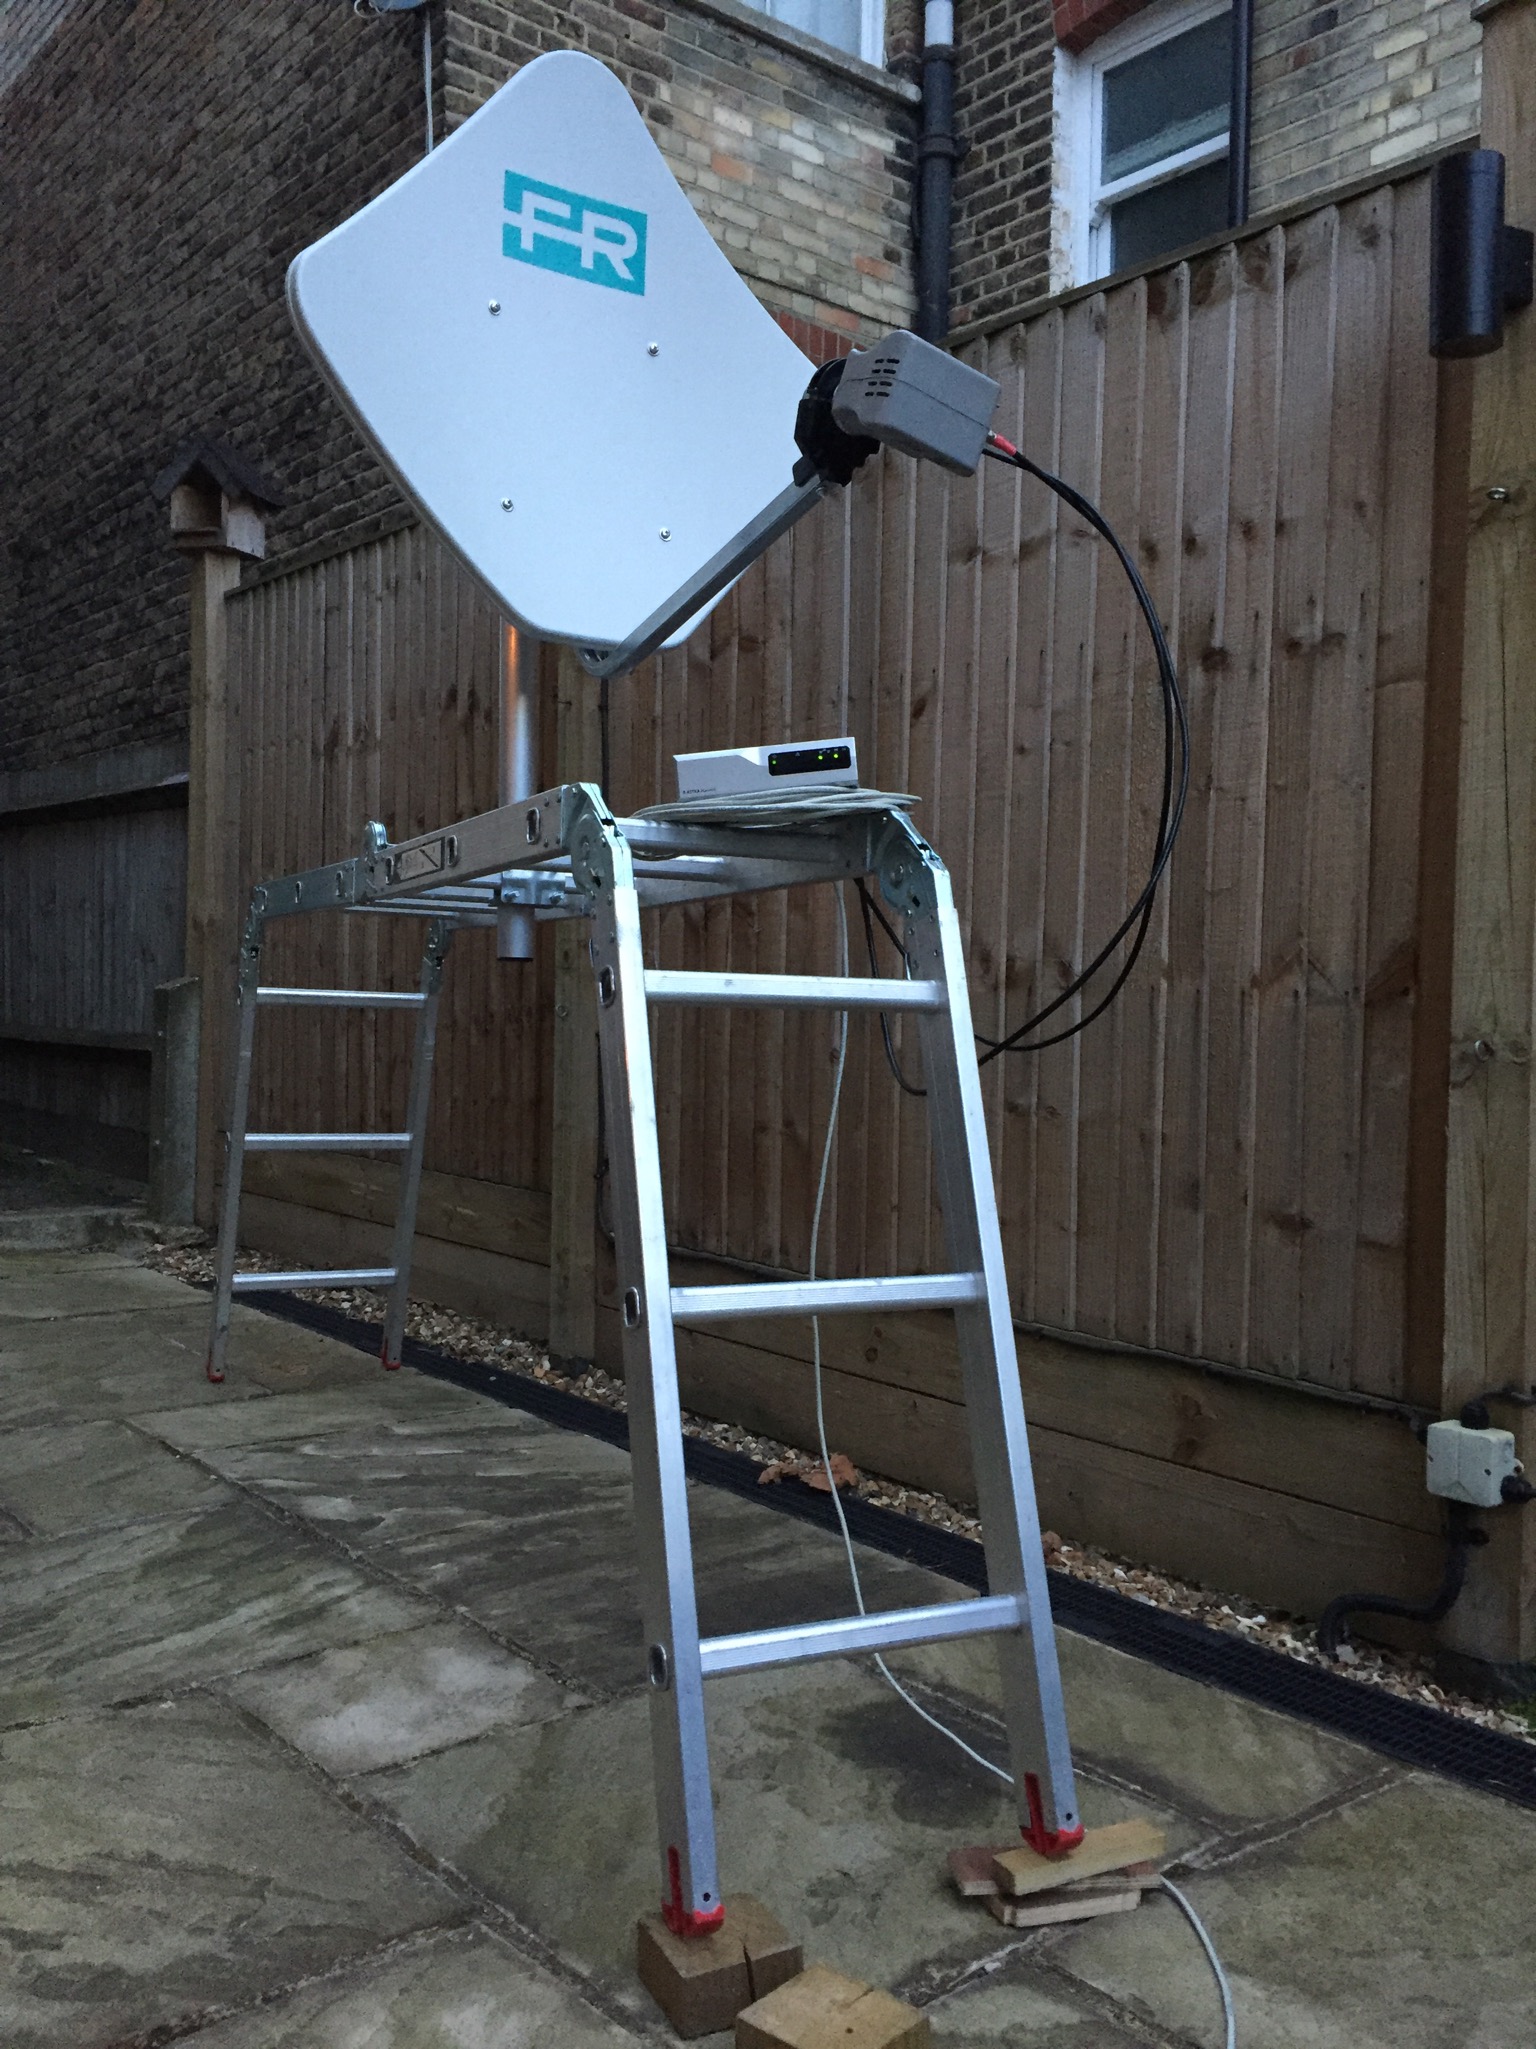 Antenna and modem on the make-shift test bench